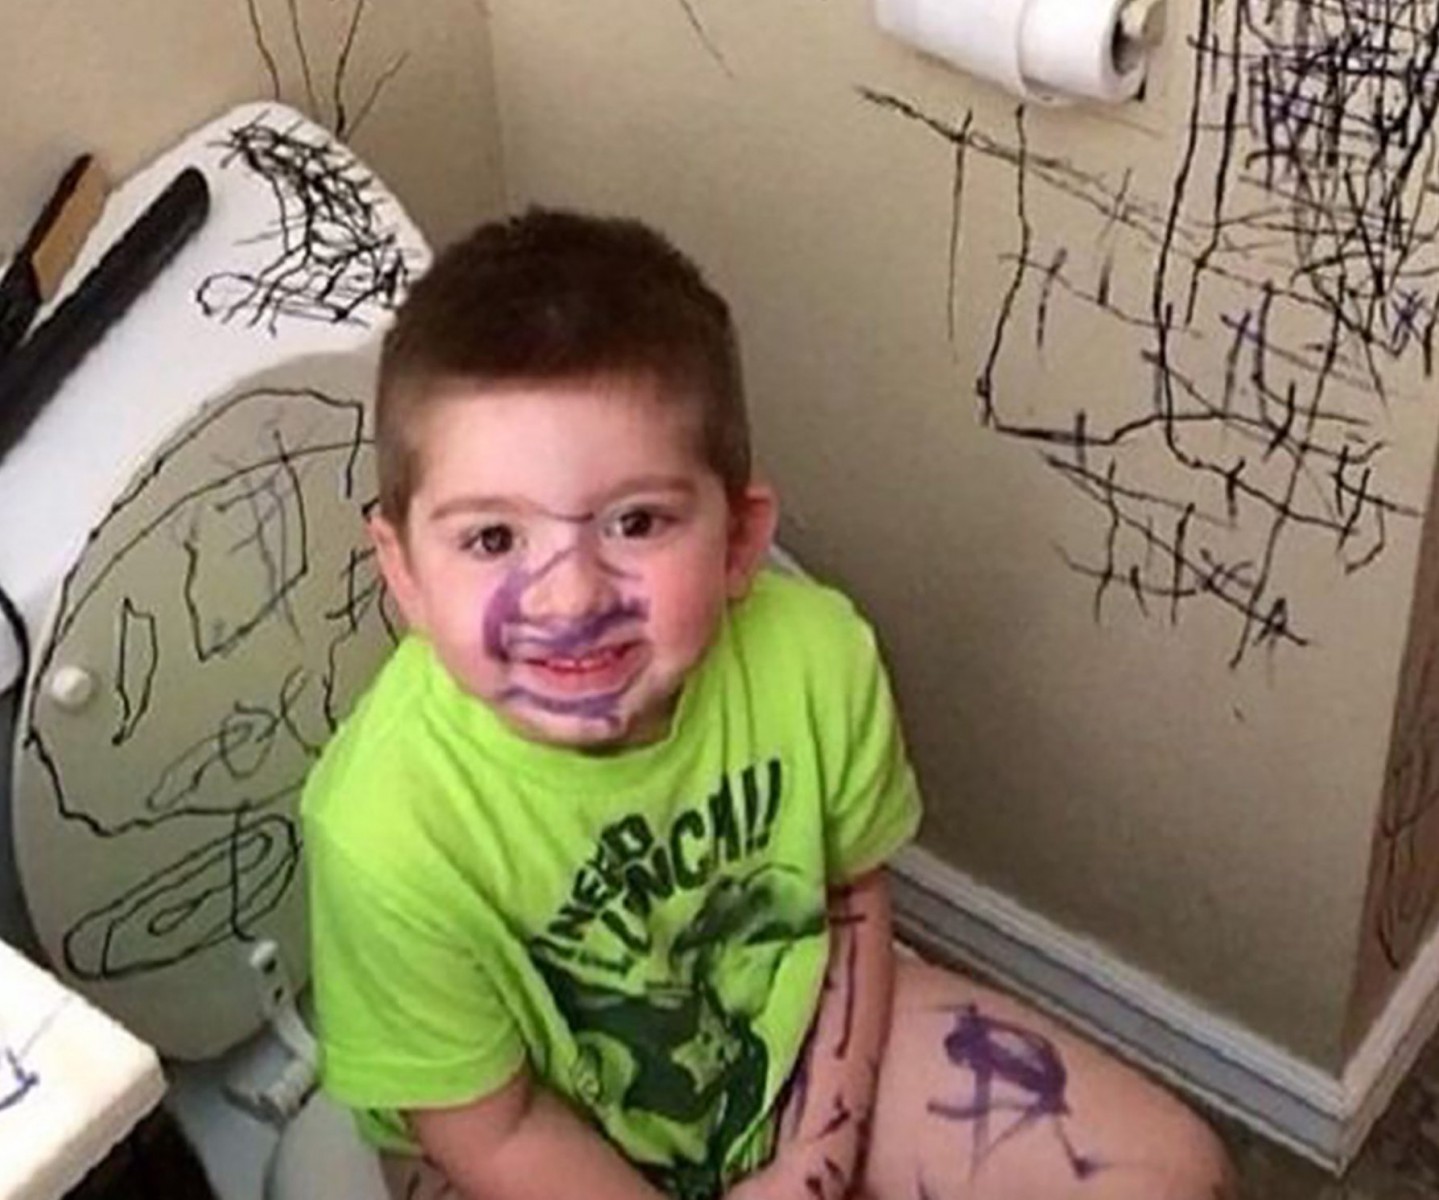 Lets hope it wasn't a permanent marker that this lad put to face, walls and toilet seat